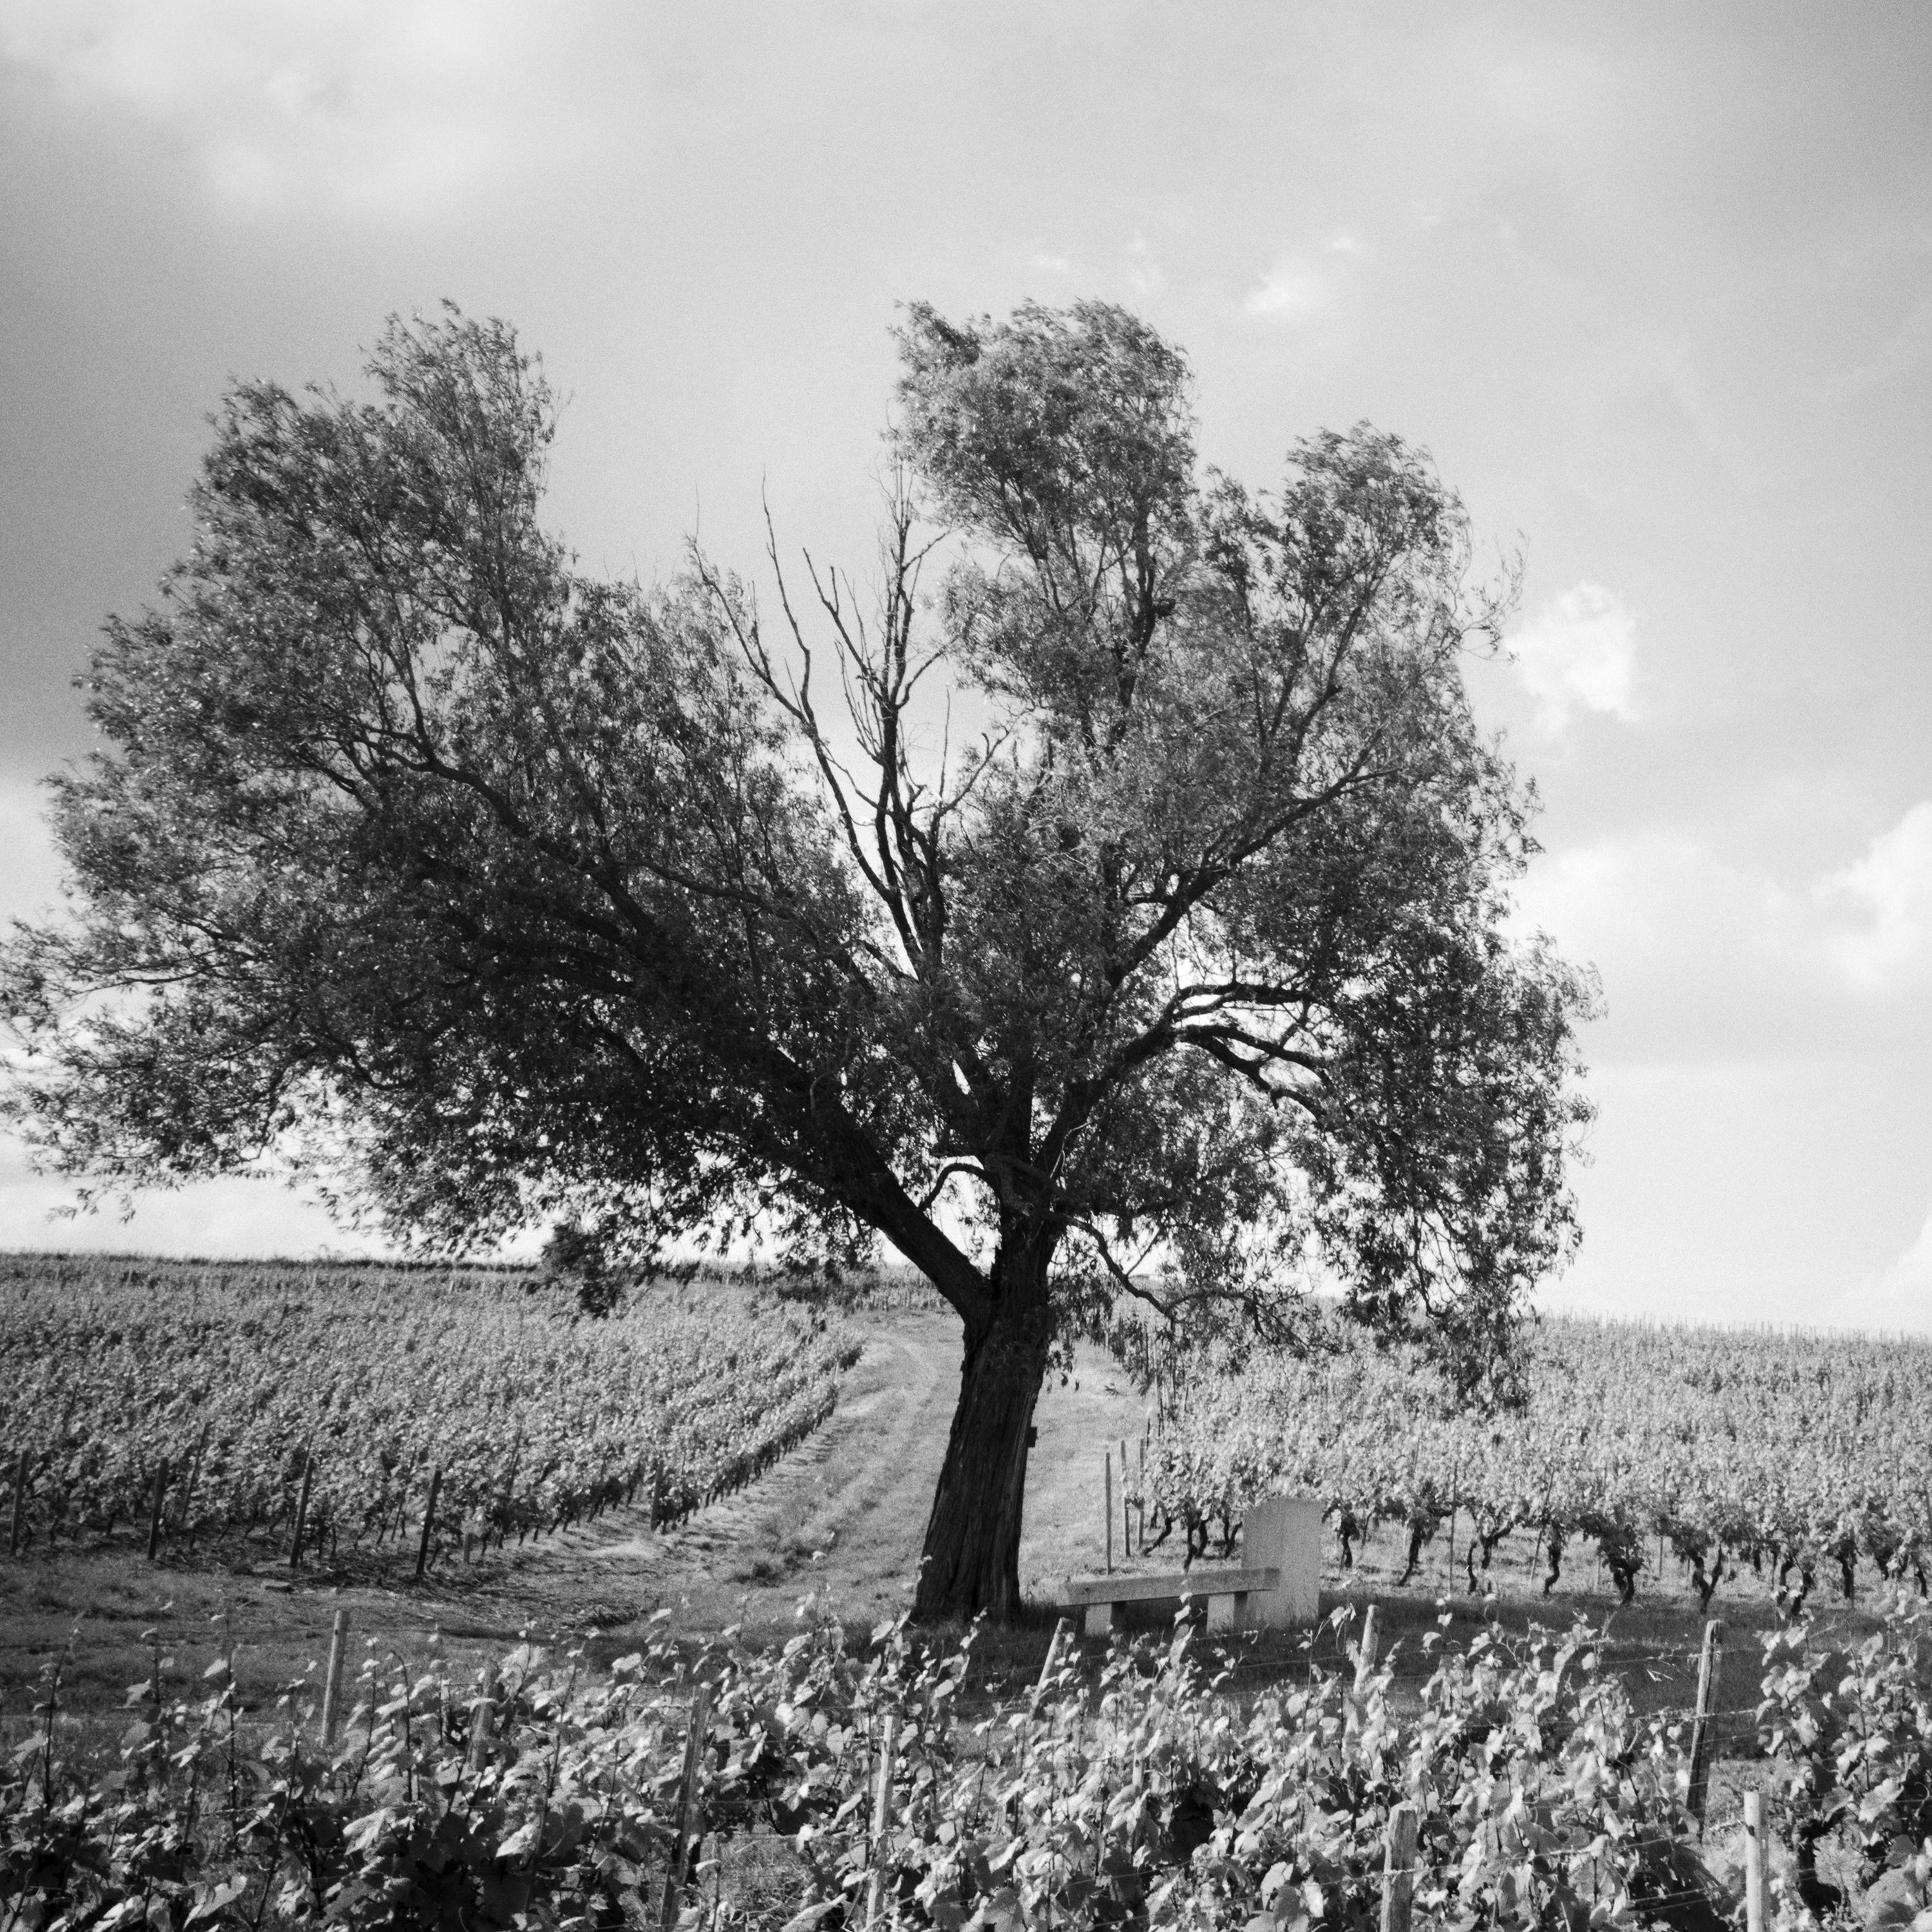 Old Tree at Vineyard, Bordeaux, France, black and white landscape photography For Sale 3